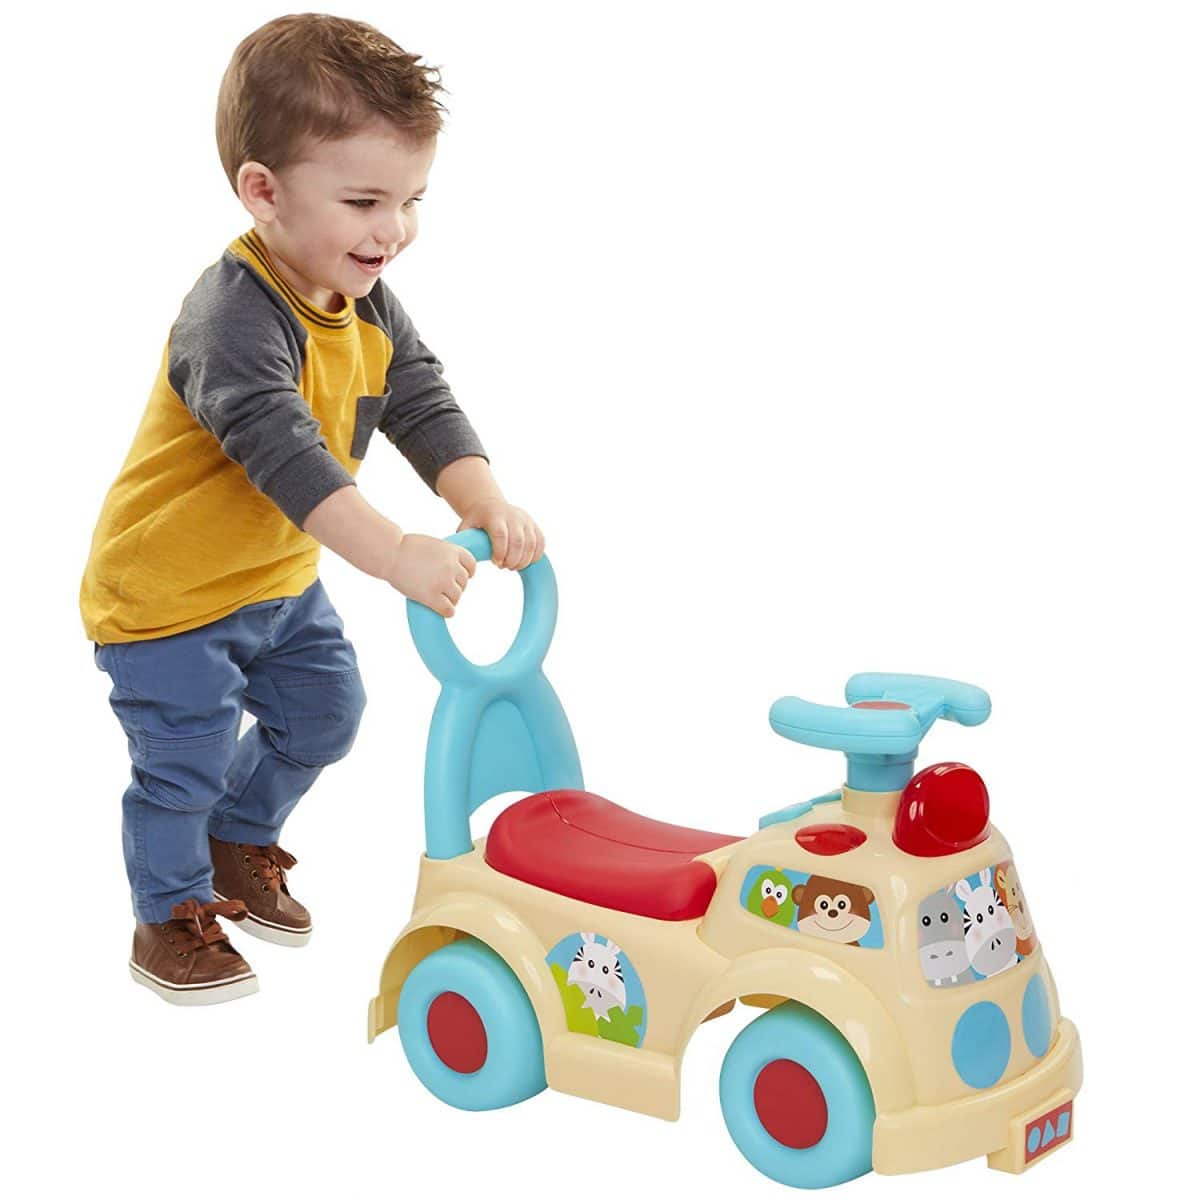 walking push toys for 1 year old